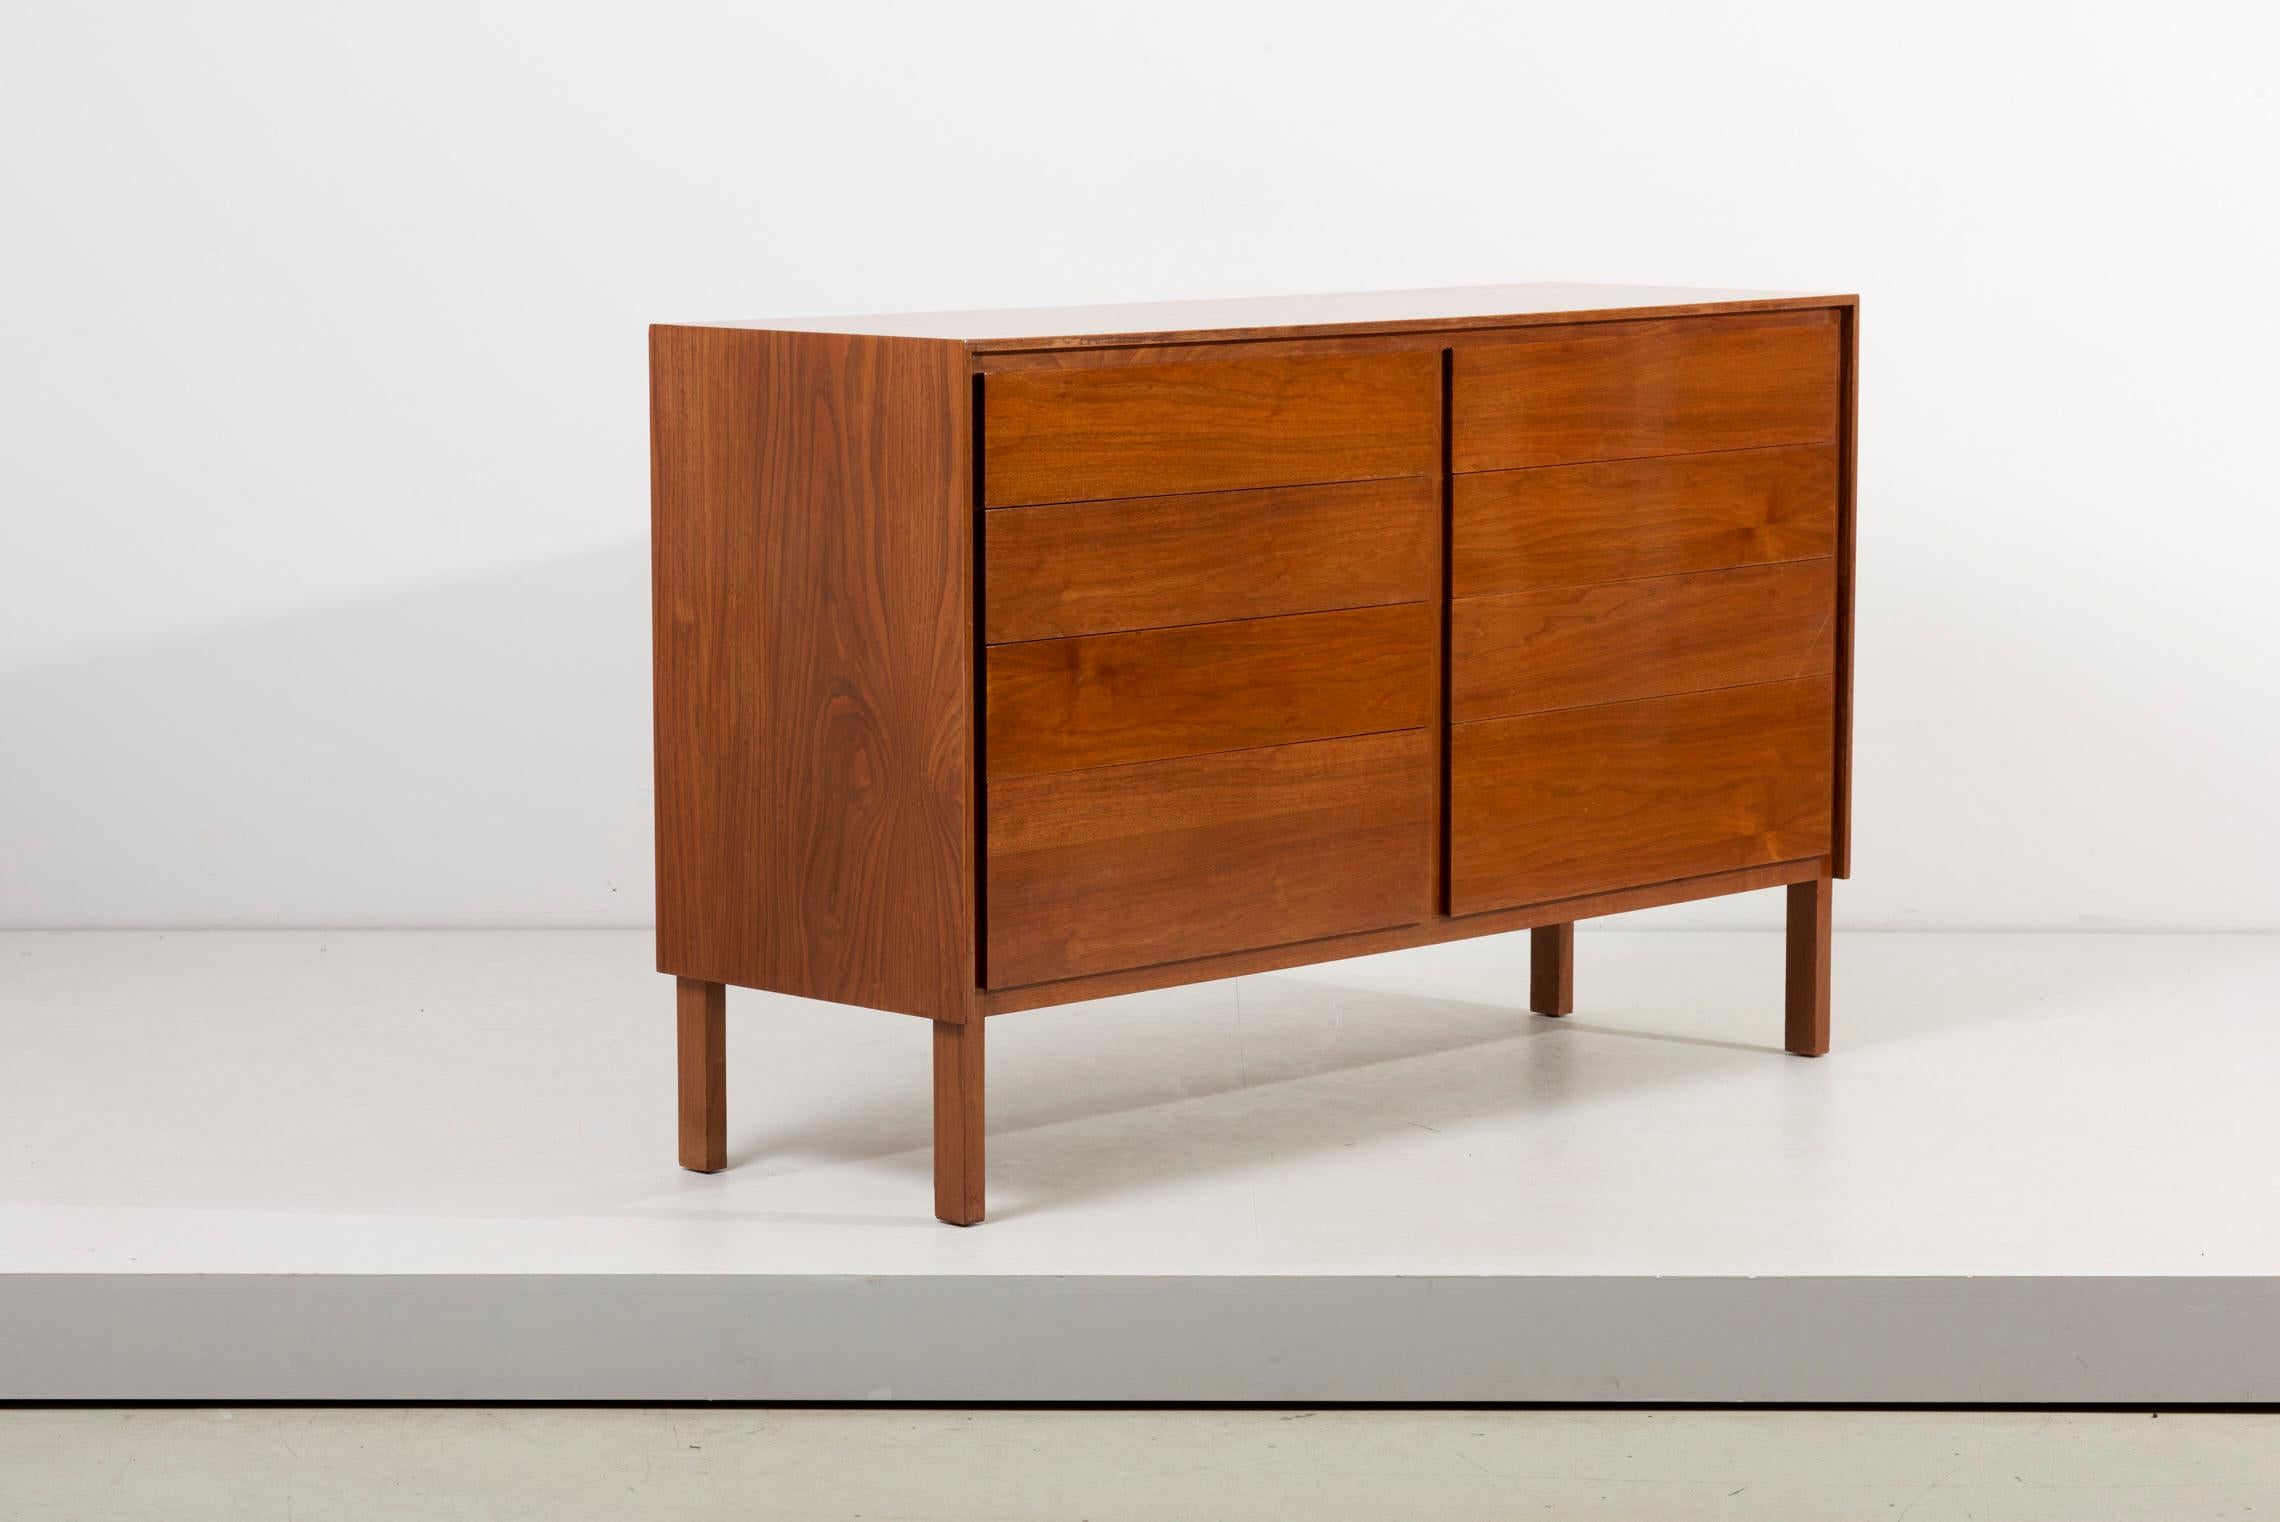 American Modernist Sideboard in Walnut by Allan Gould, USA 1960s For Sale